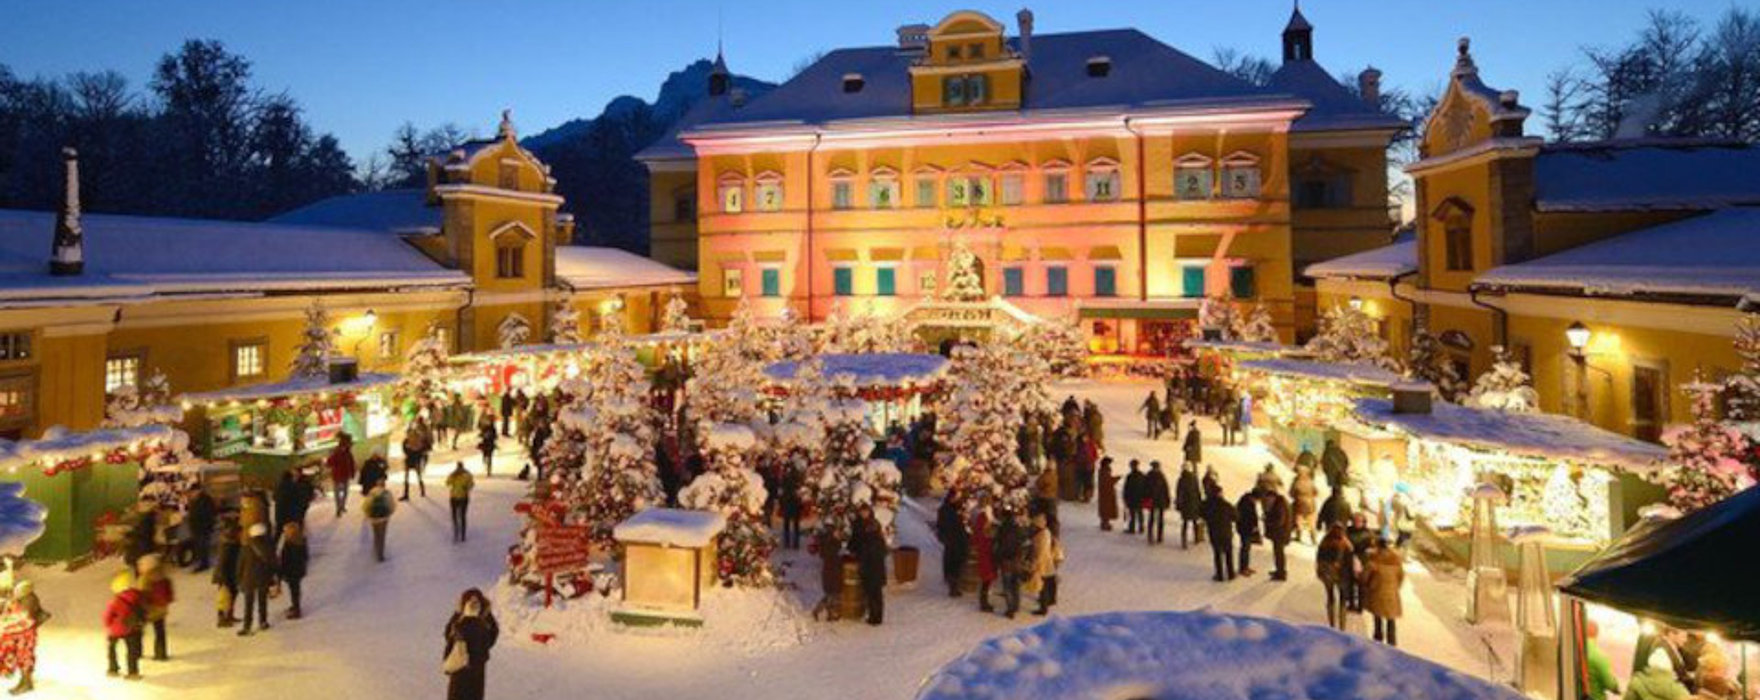 Hellbrunn Palace & Water Games - View of the Advent Market at Christmas Time